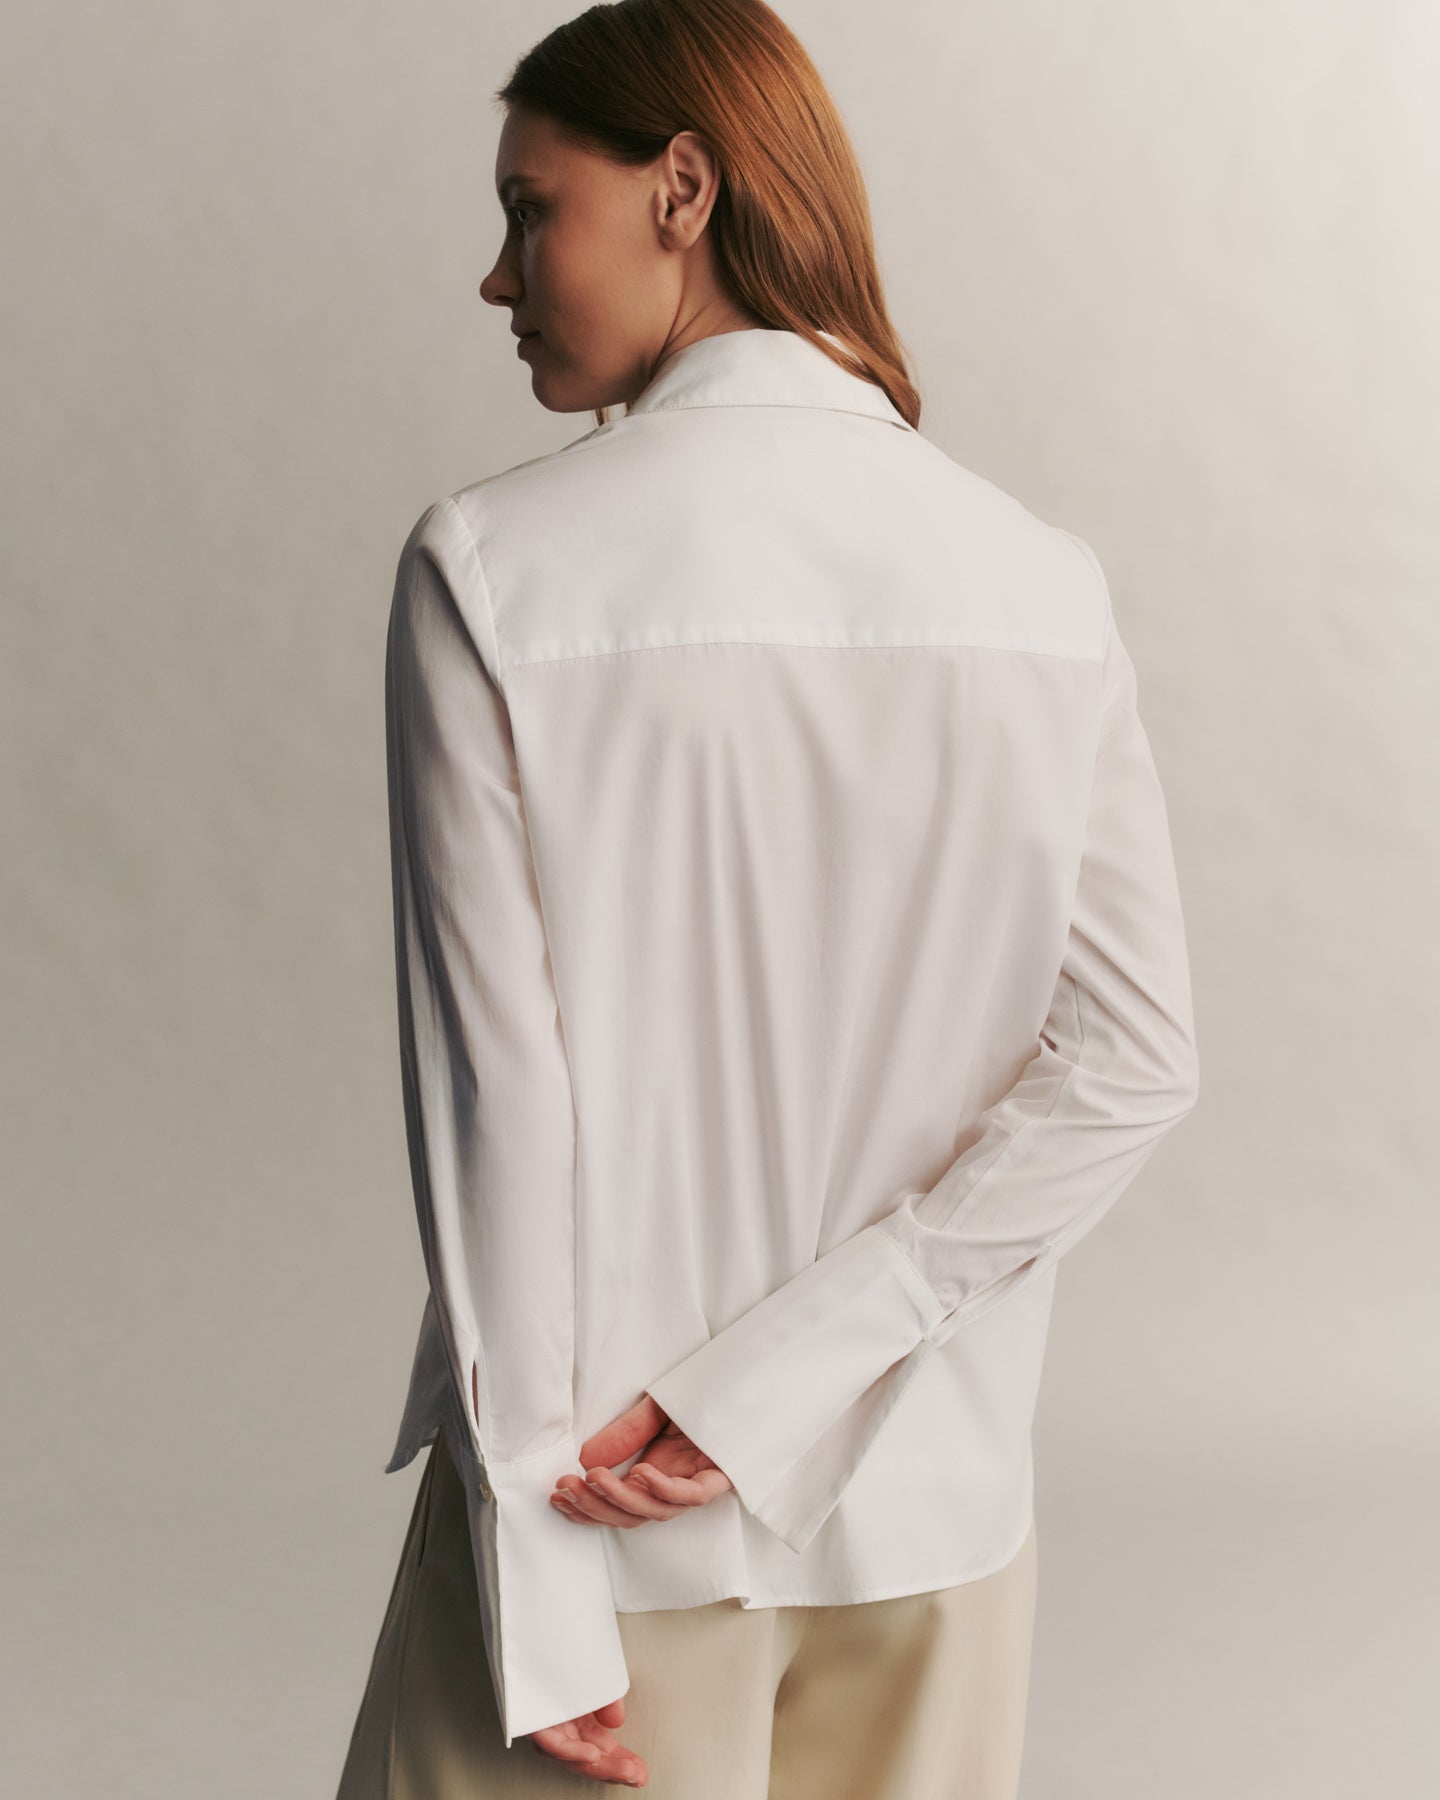 TWP White Object Of Affection Top With Embellished Placket in Superfine Cotton view 6